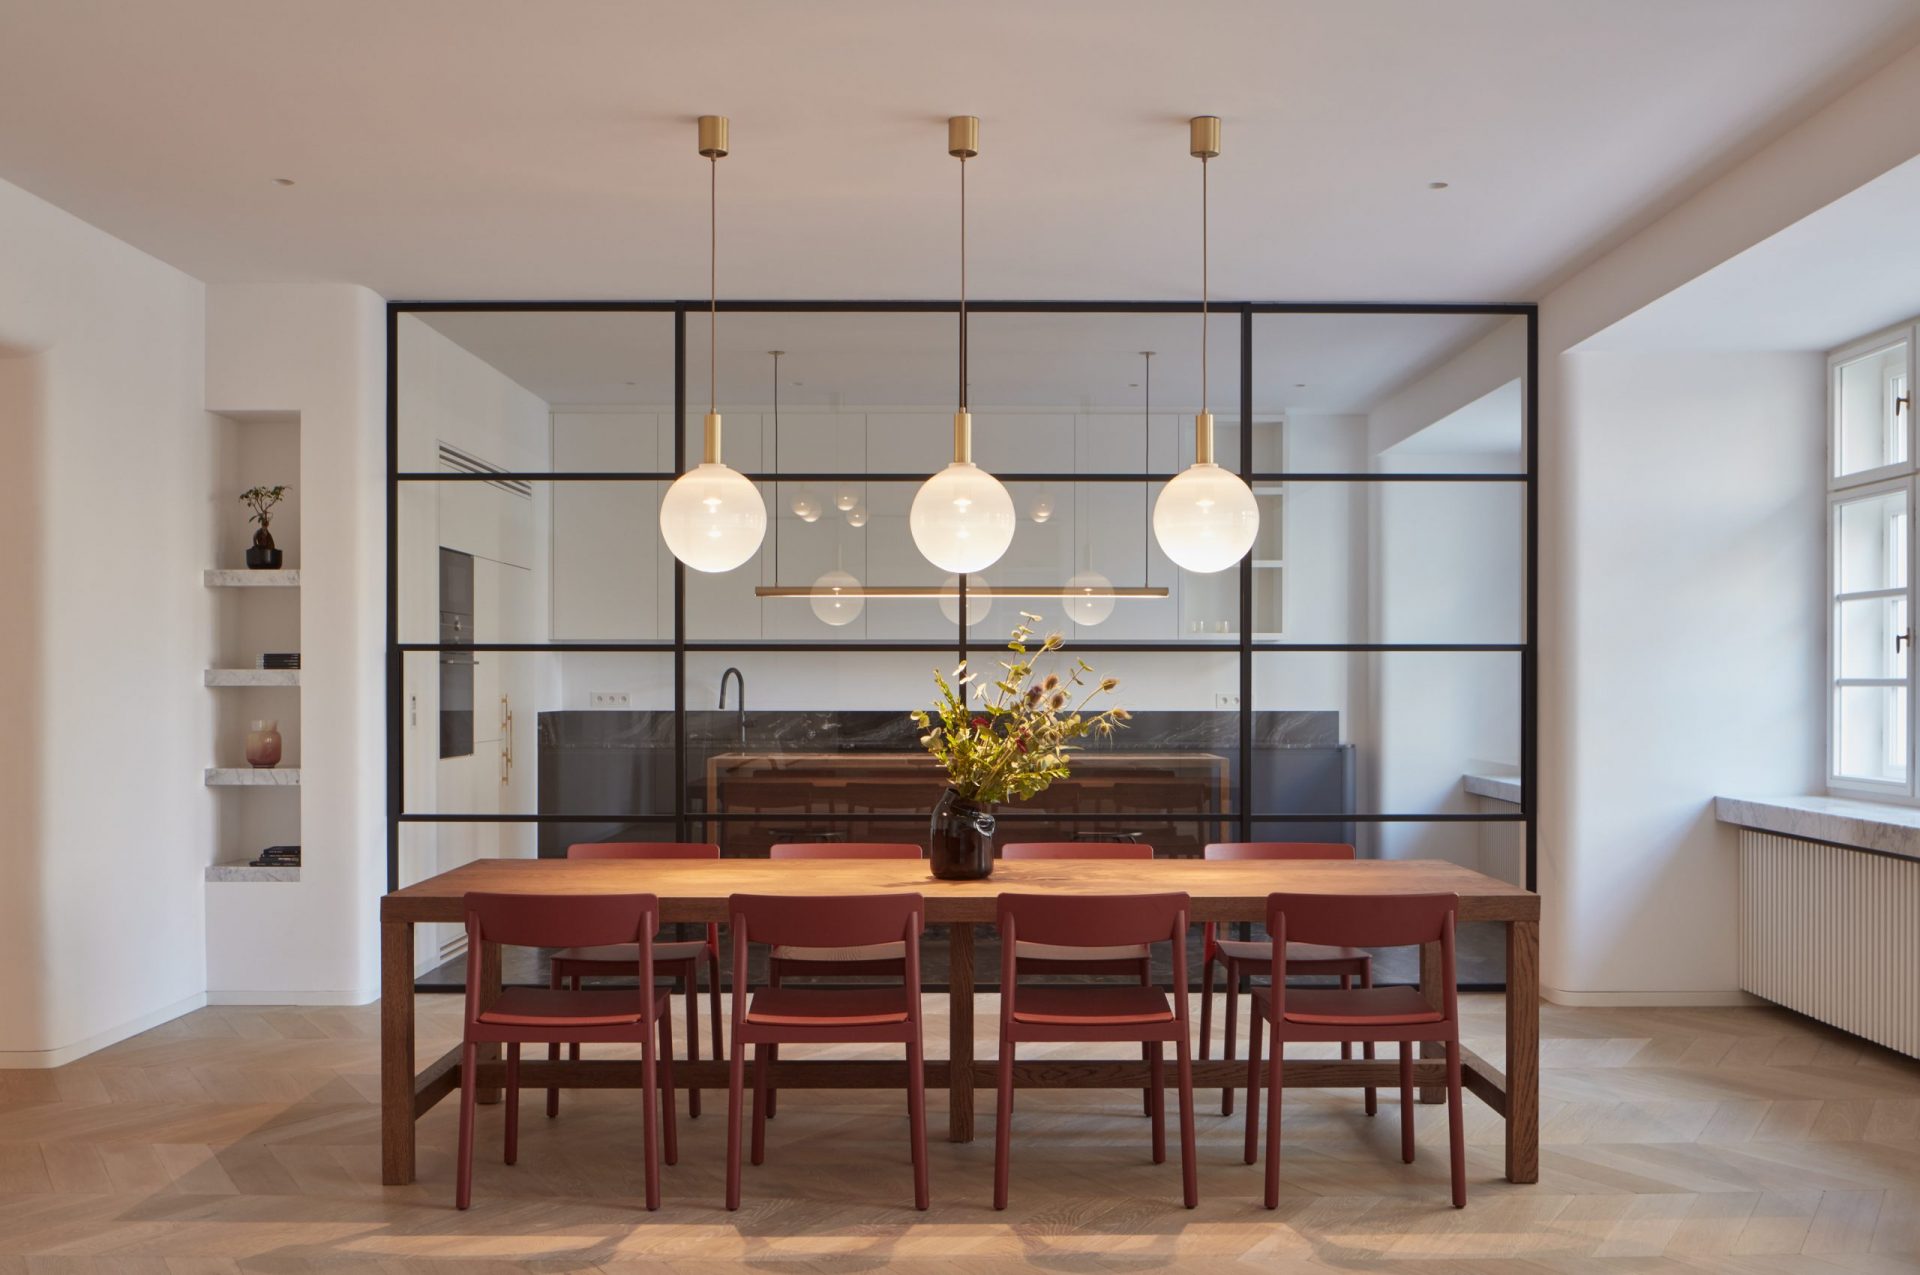 Pendant Lights in the dining room